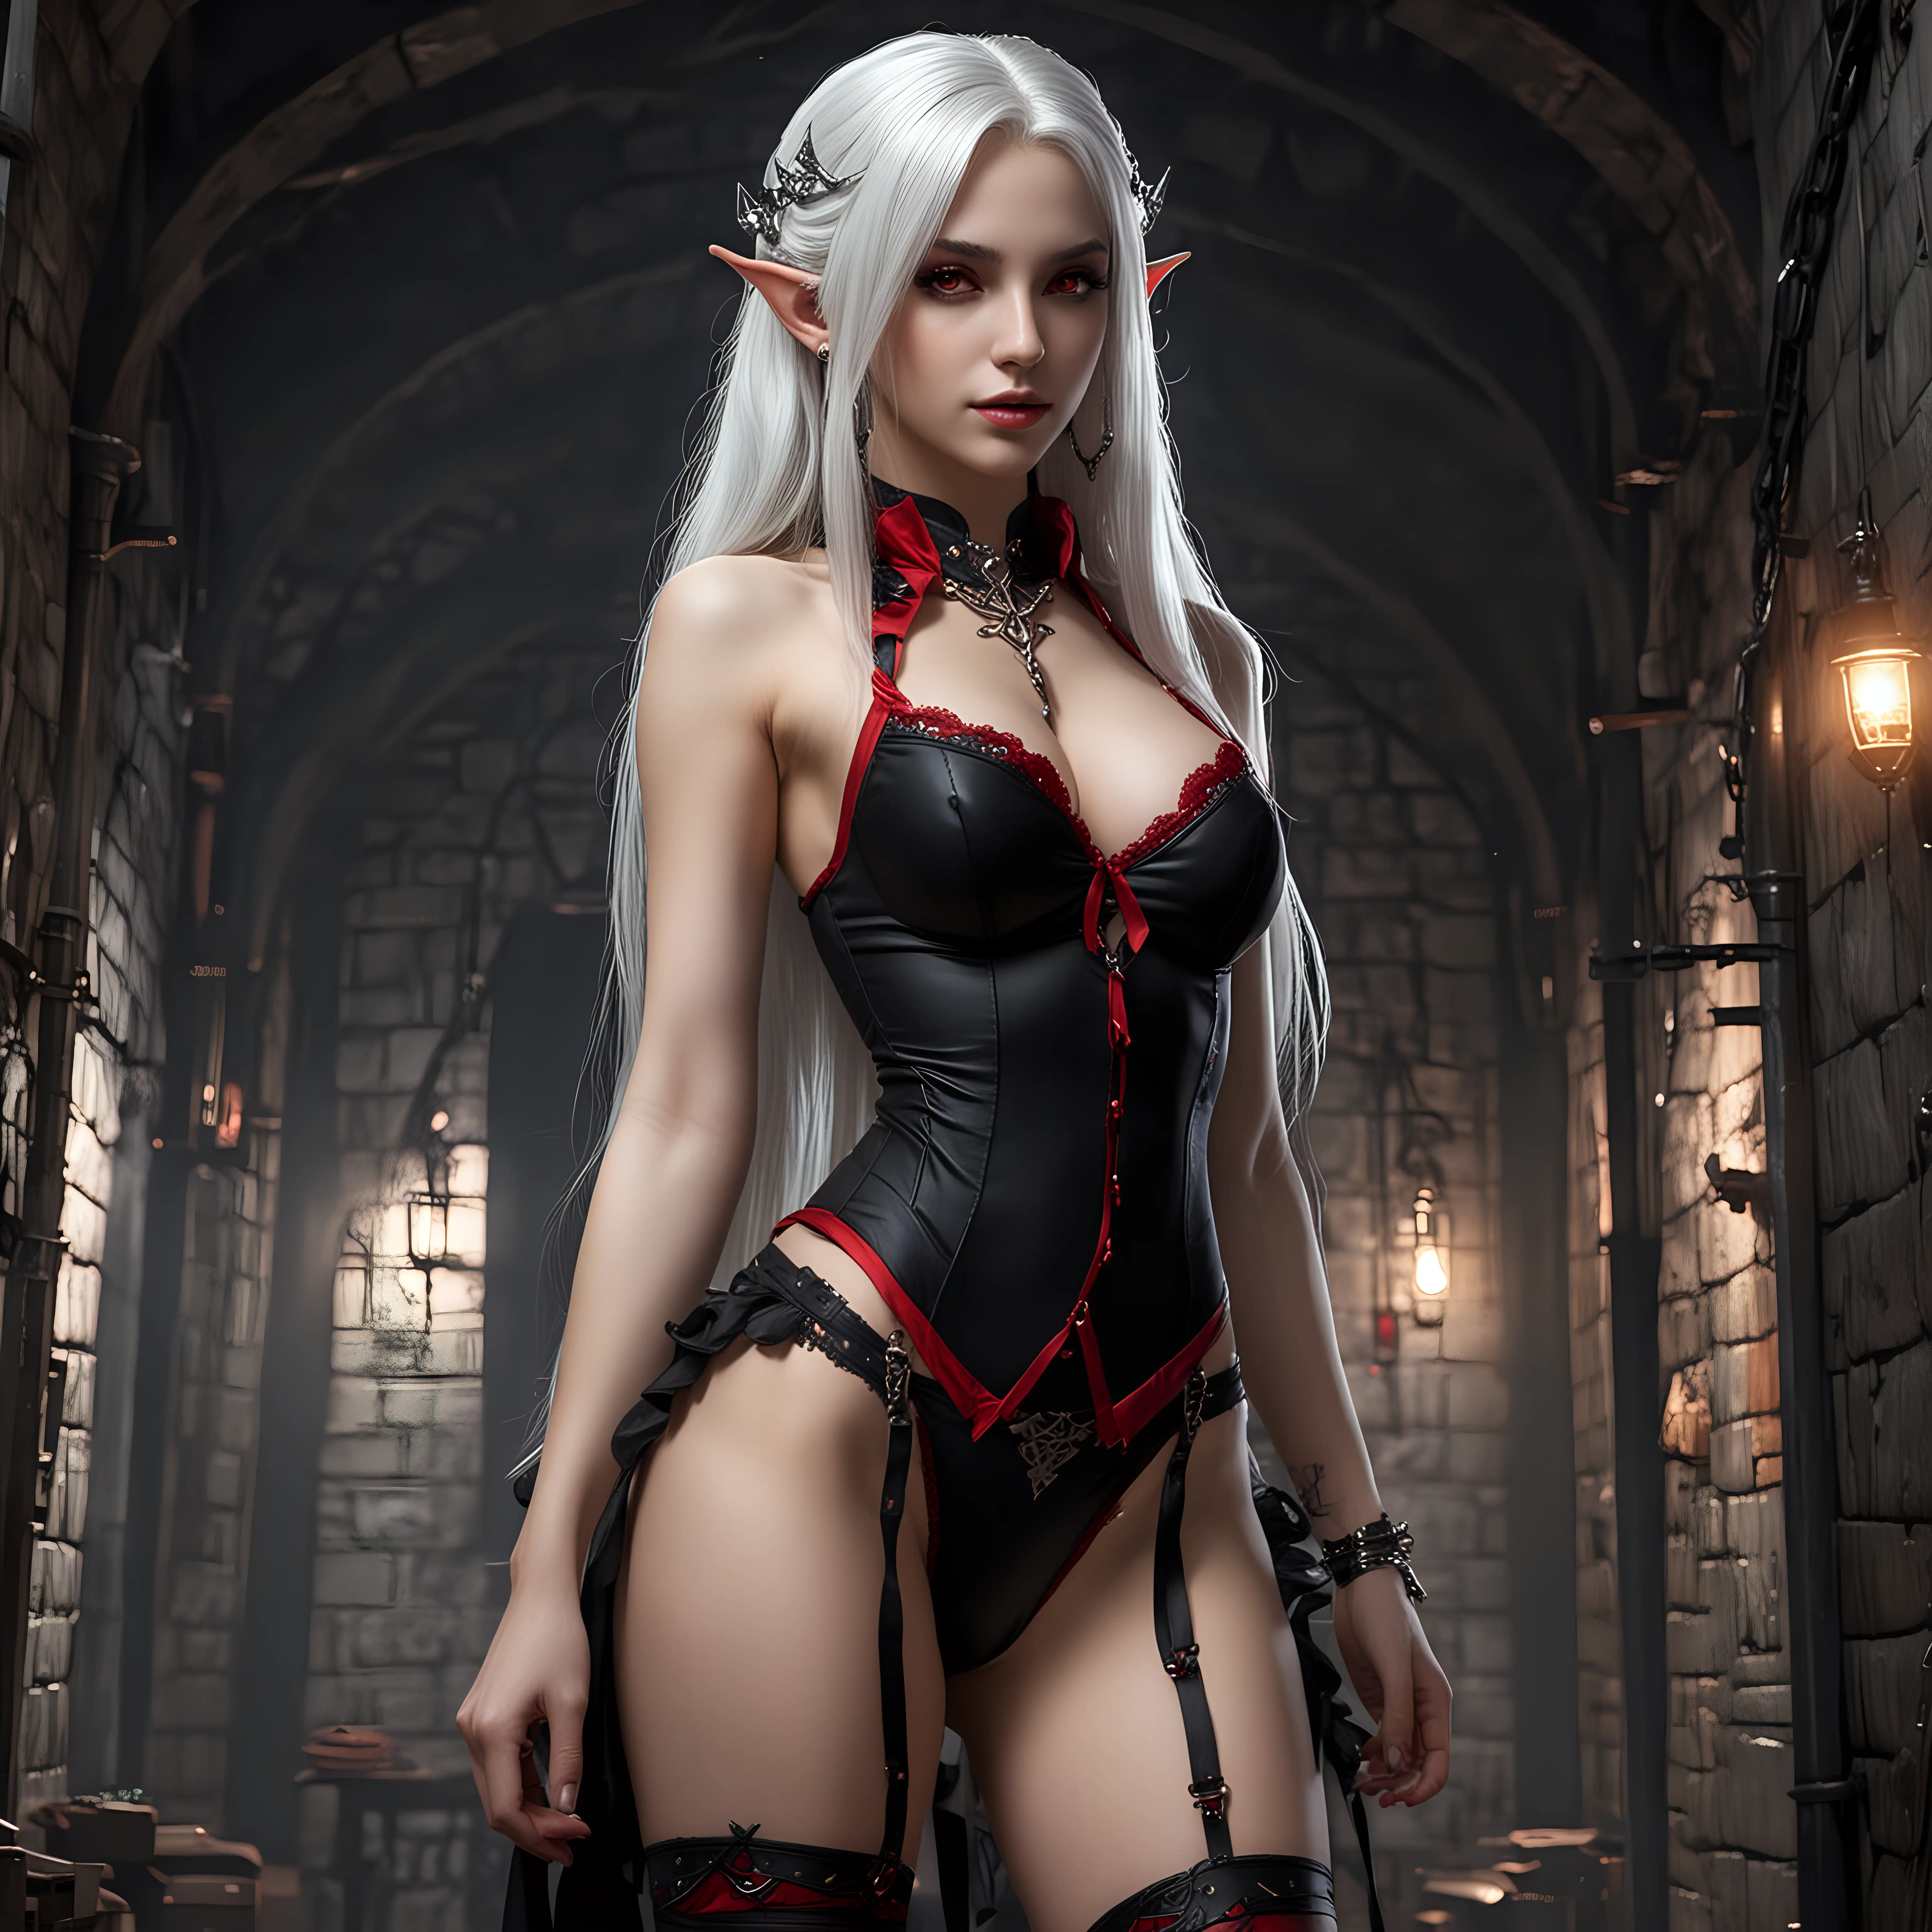 Seductive Demoness in Red and Black Lingerie in Dungeon Cell